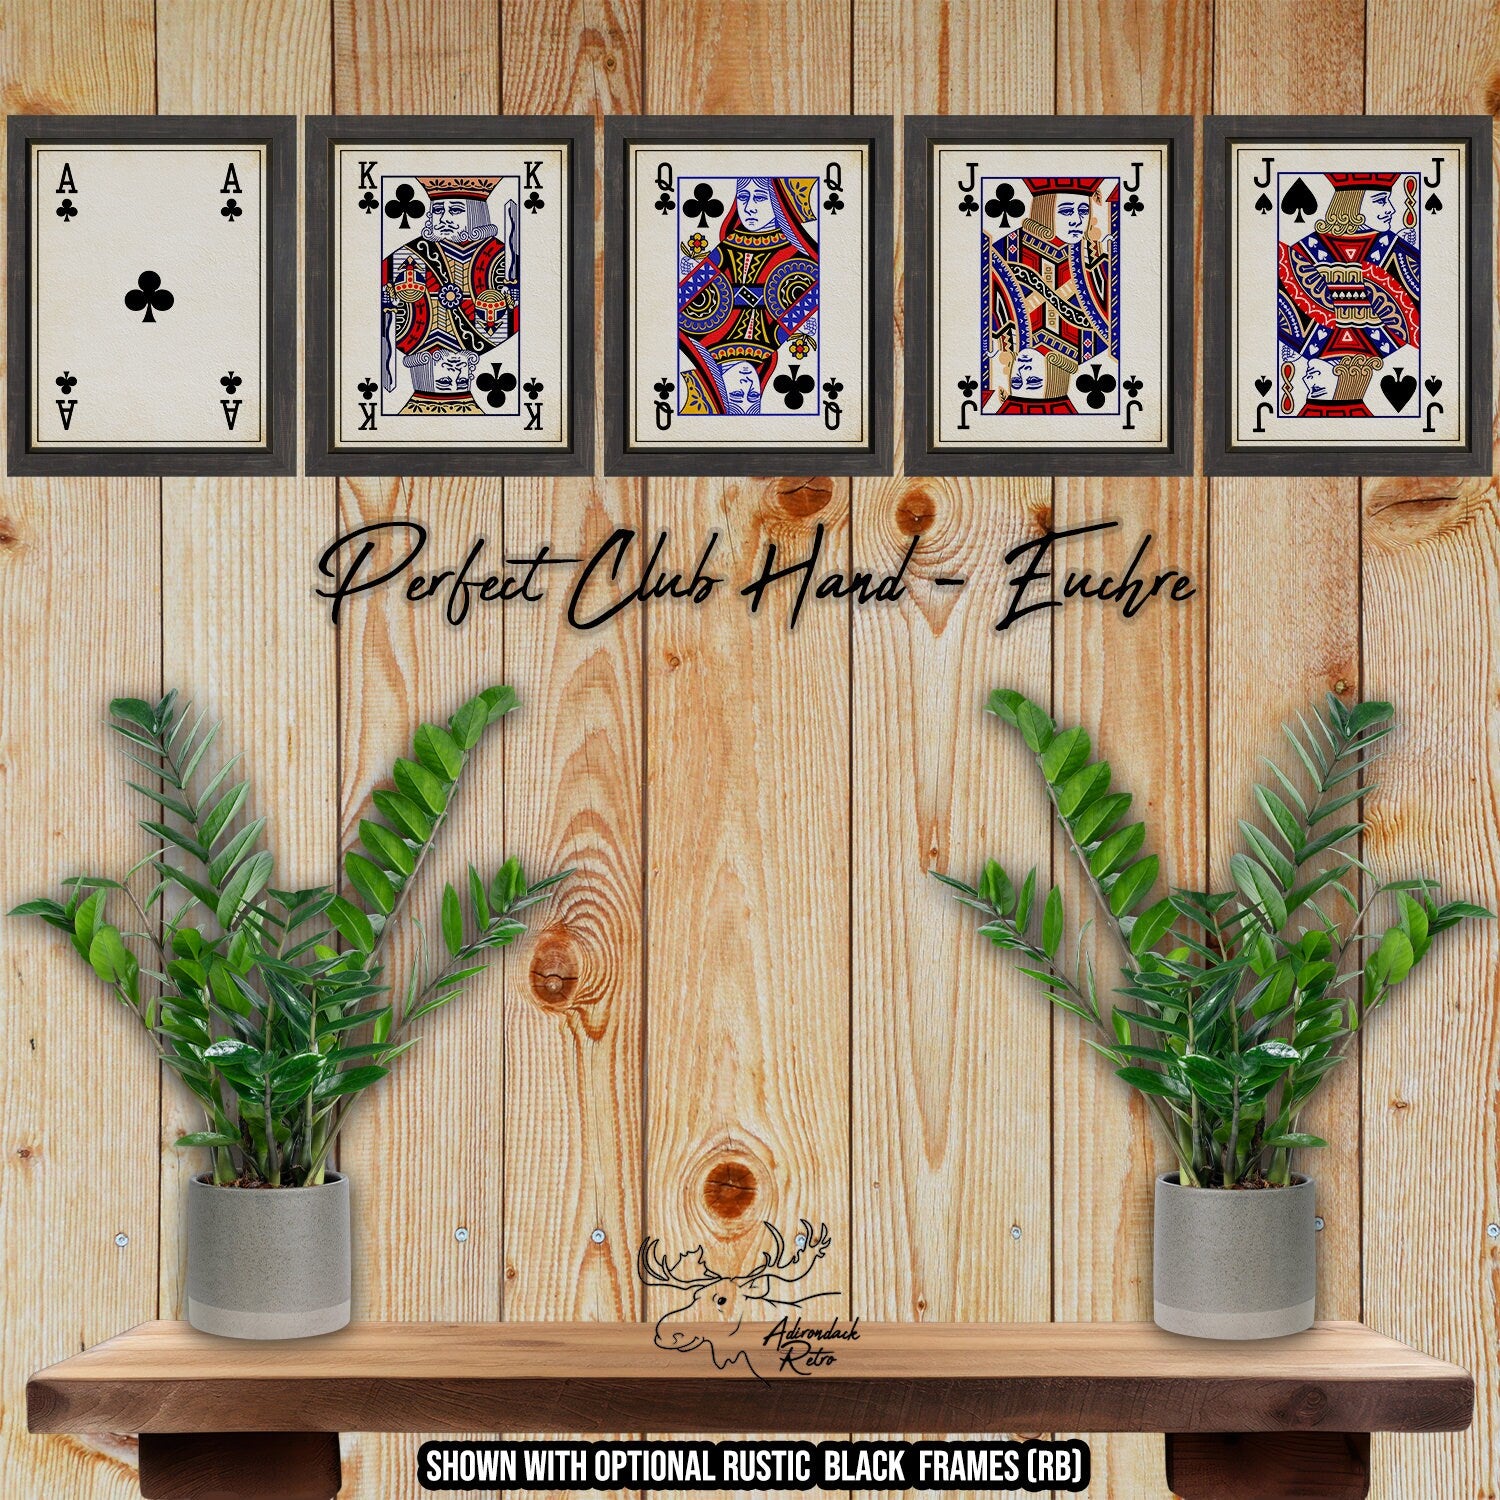 Euchre Playing Card Prints - Perfect Clubs Hand Playing Card Posters at Adirondack Retro